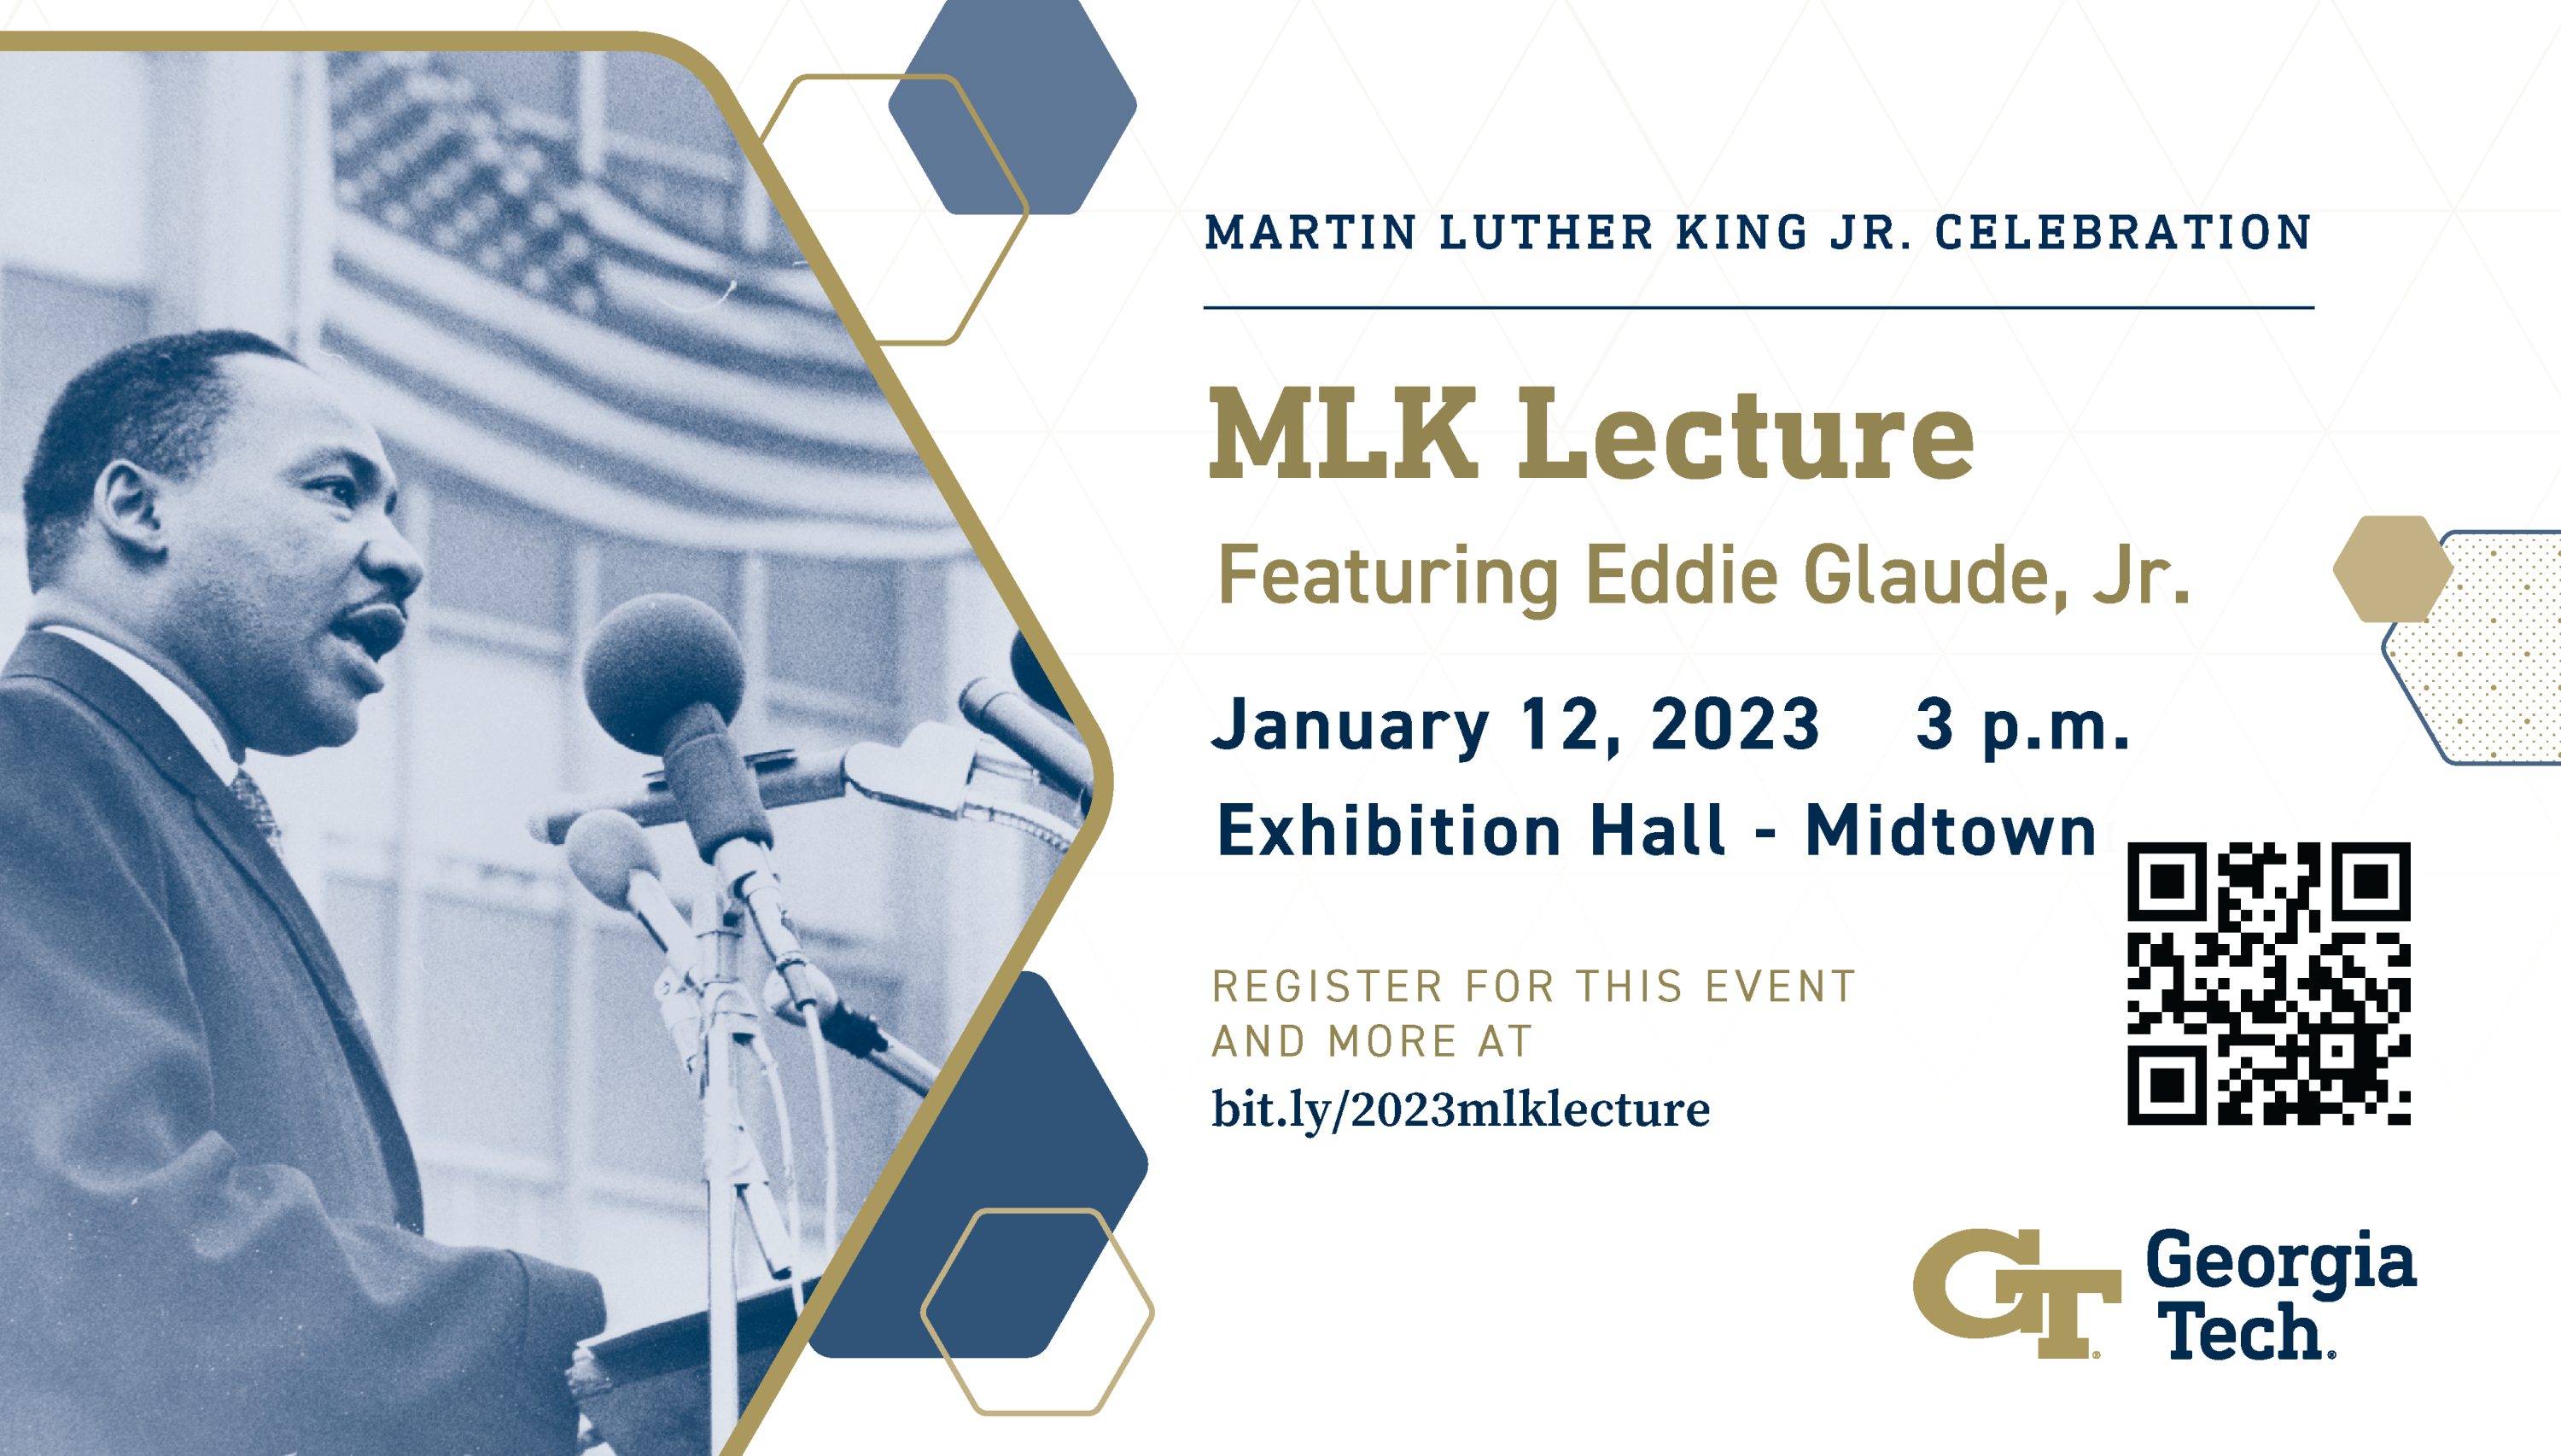 As part of Georgia Tech’s 2023 Martin Luther King Jr. Celebration, the 12th Annual MLK Lecture will be held on January 12, featuring Eddie Glaude Jr., Ph.D., James S. McDonnell Distinguished University Professor and chair of the department of African American Studies at Princeton University.